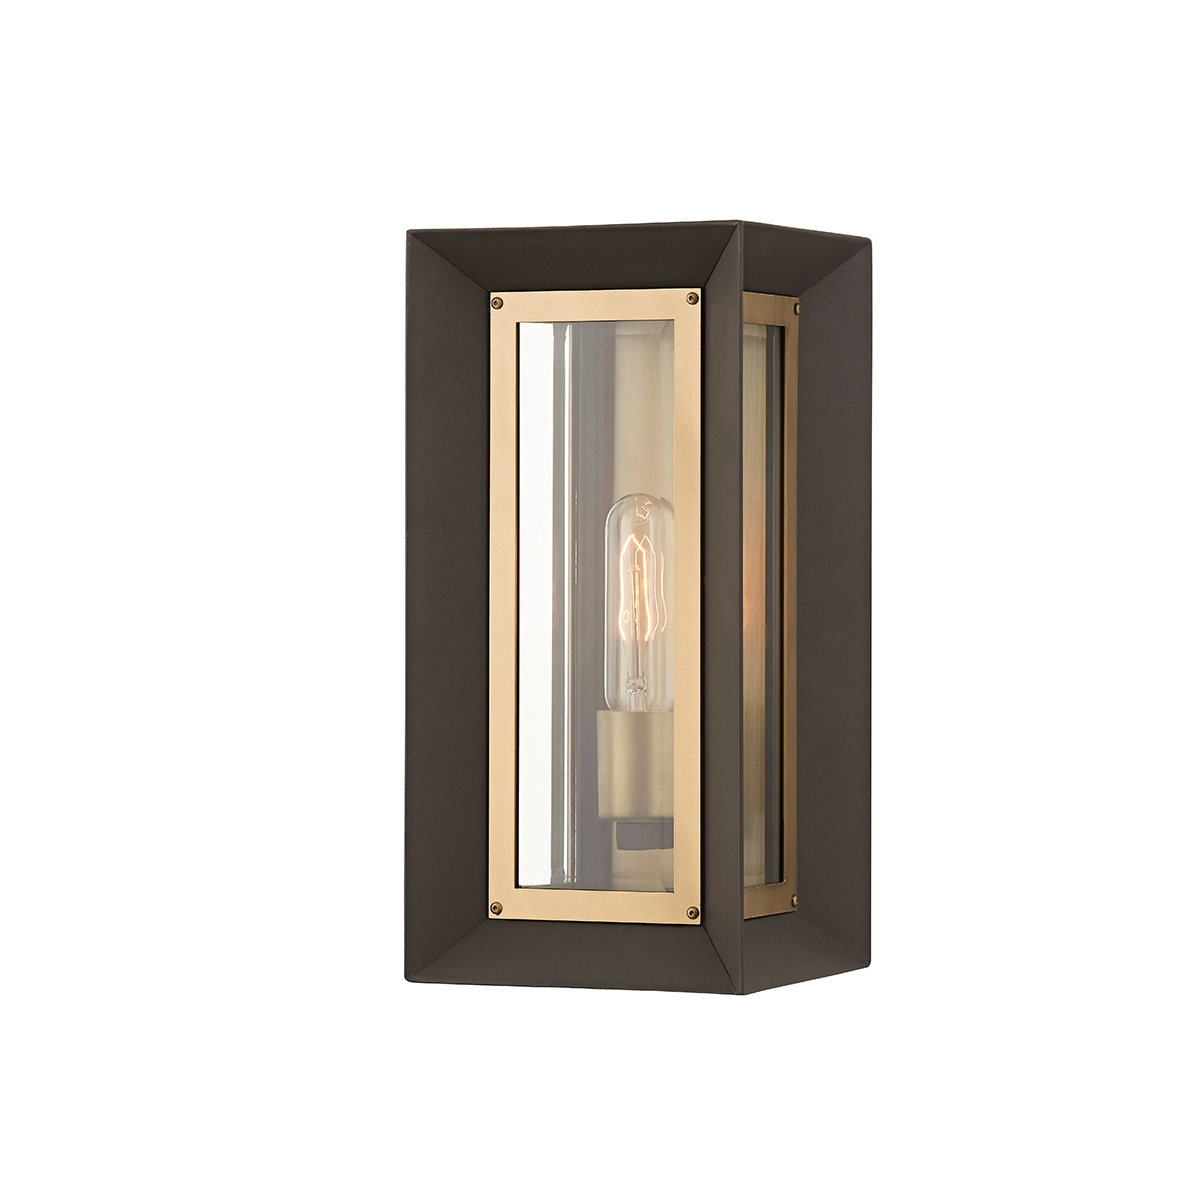 Troy LOWRY 1 LIGHT SMALL EXTERIOR WALL SCONCE B4051 Outdoor l Wall Troy Lighting TEXTURED BRONZE/PATINA BRASS  